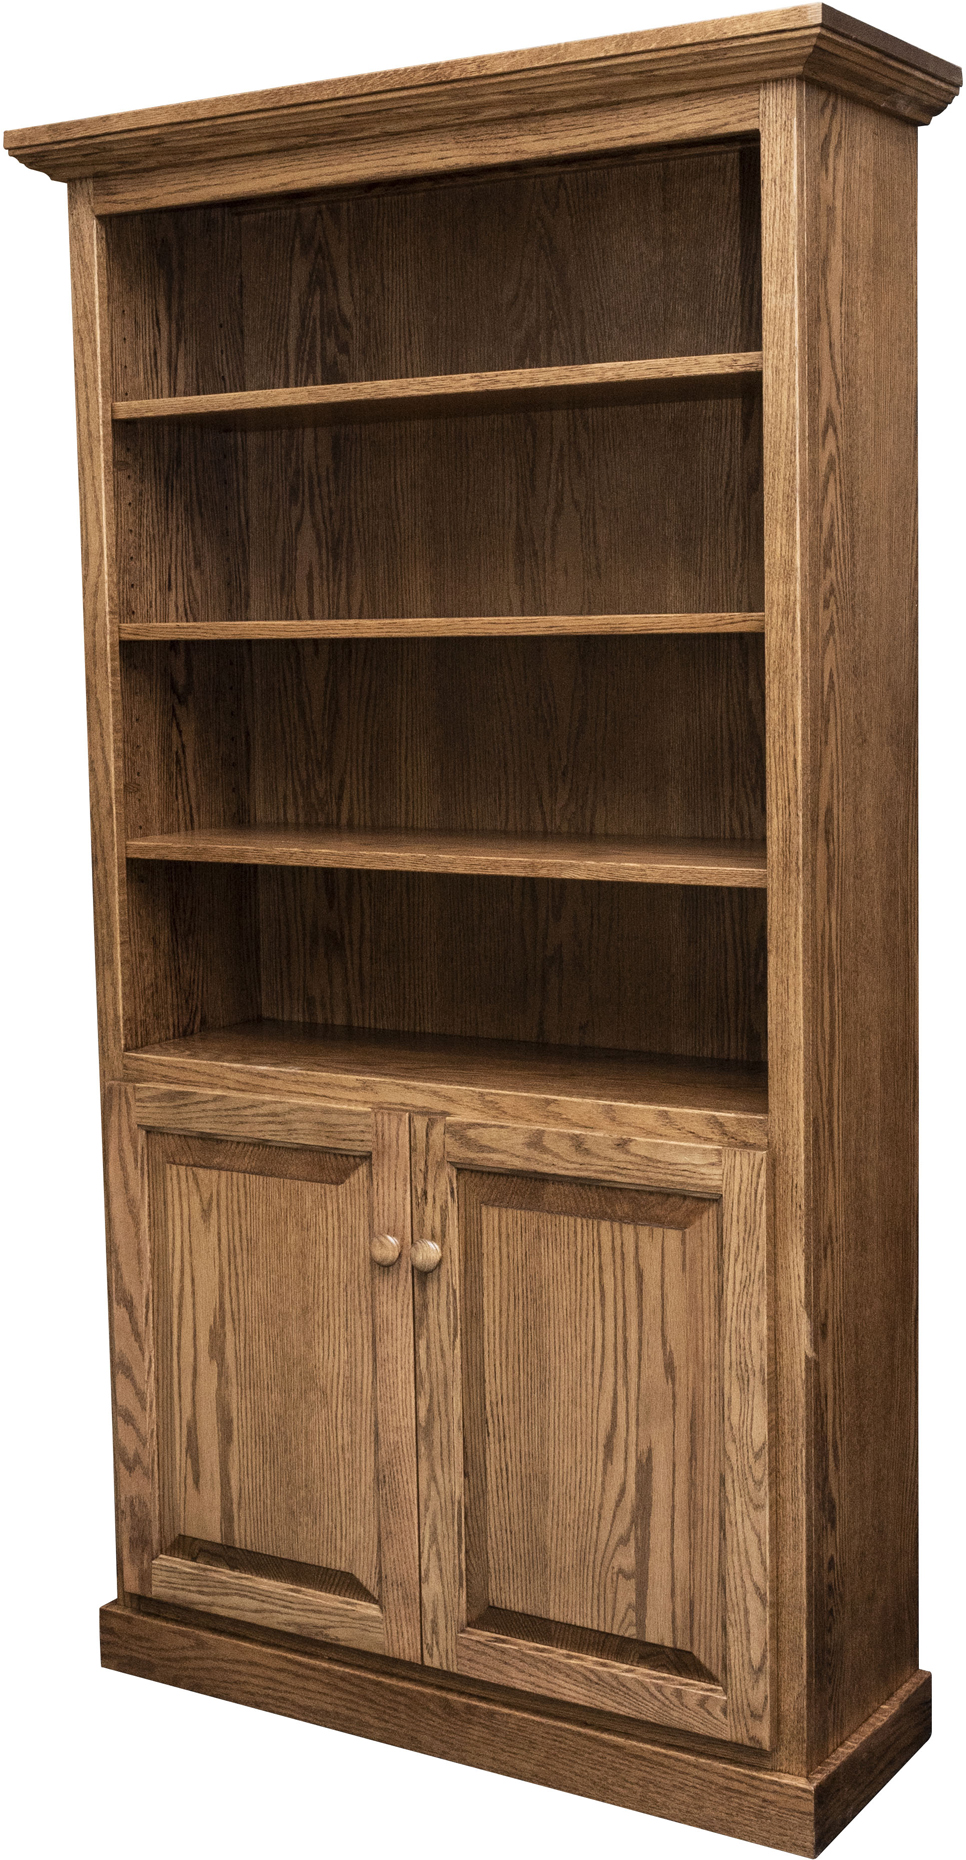 Traditional wooden bookcase with adjustable shelves